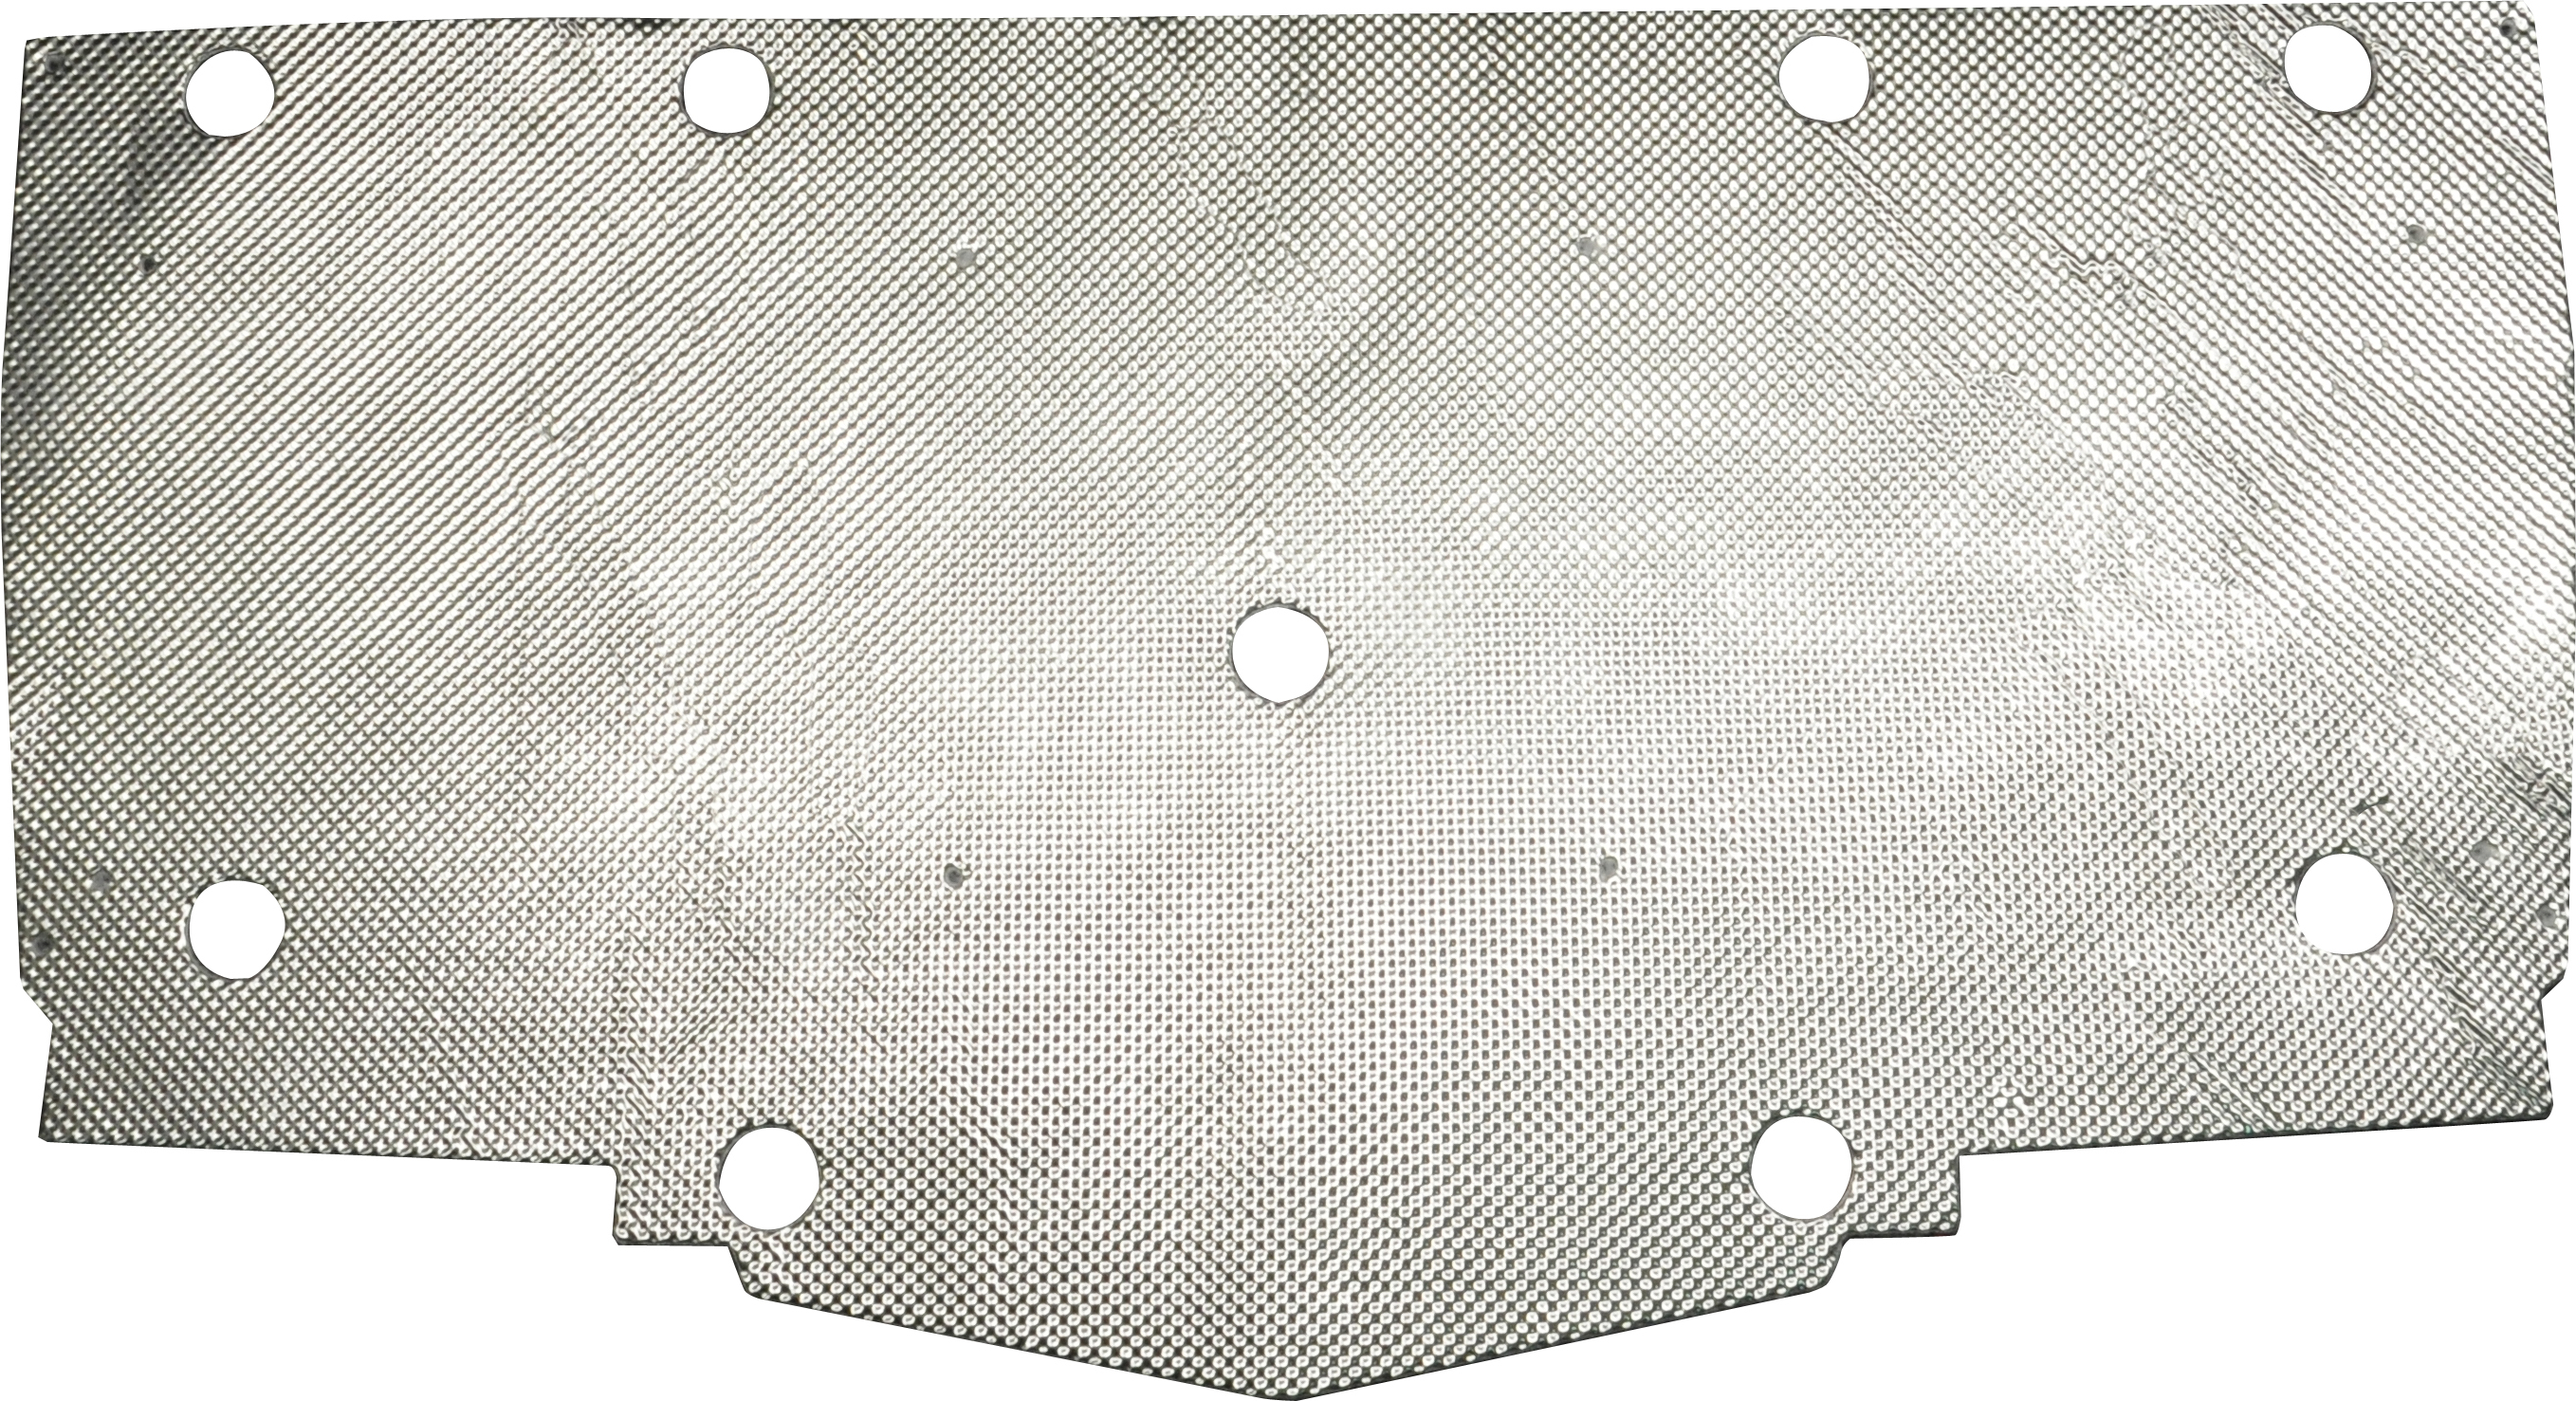 Cargo Bed Heat Shield Kit - For 08-14 Polaris RZR 800 /S - Click Image to Close